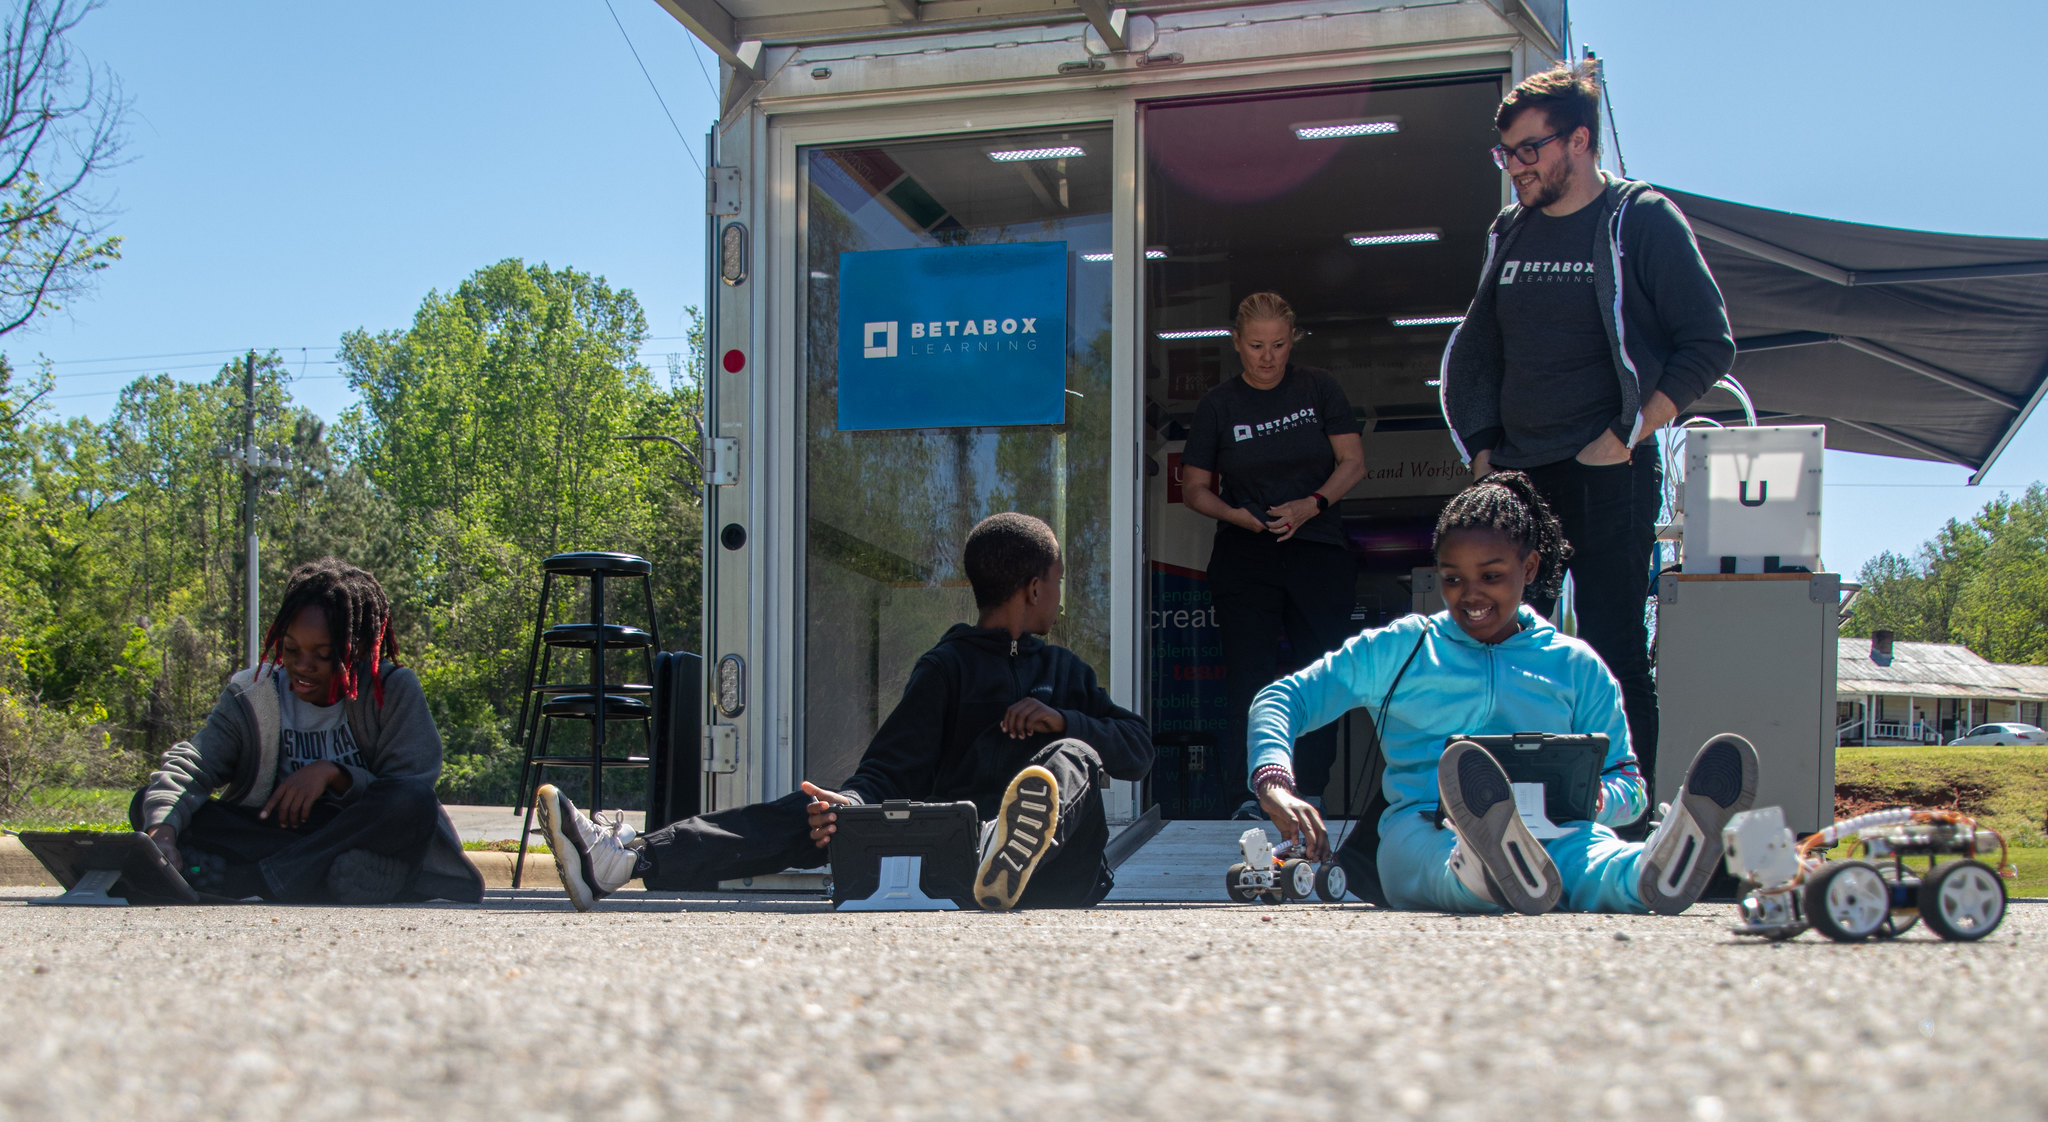 Three students sit on the ground as they operate 3-D printed remote control cars.